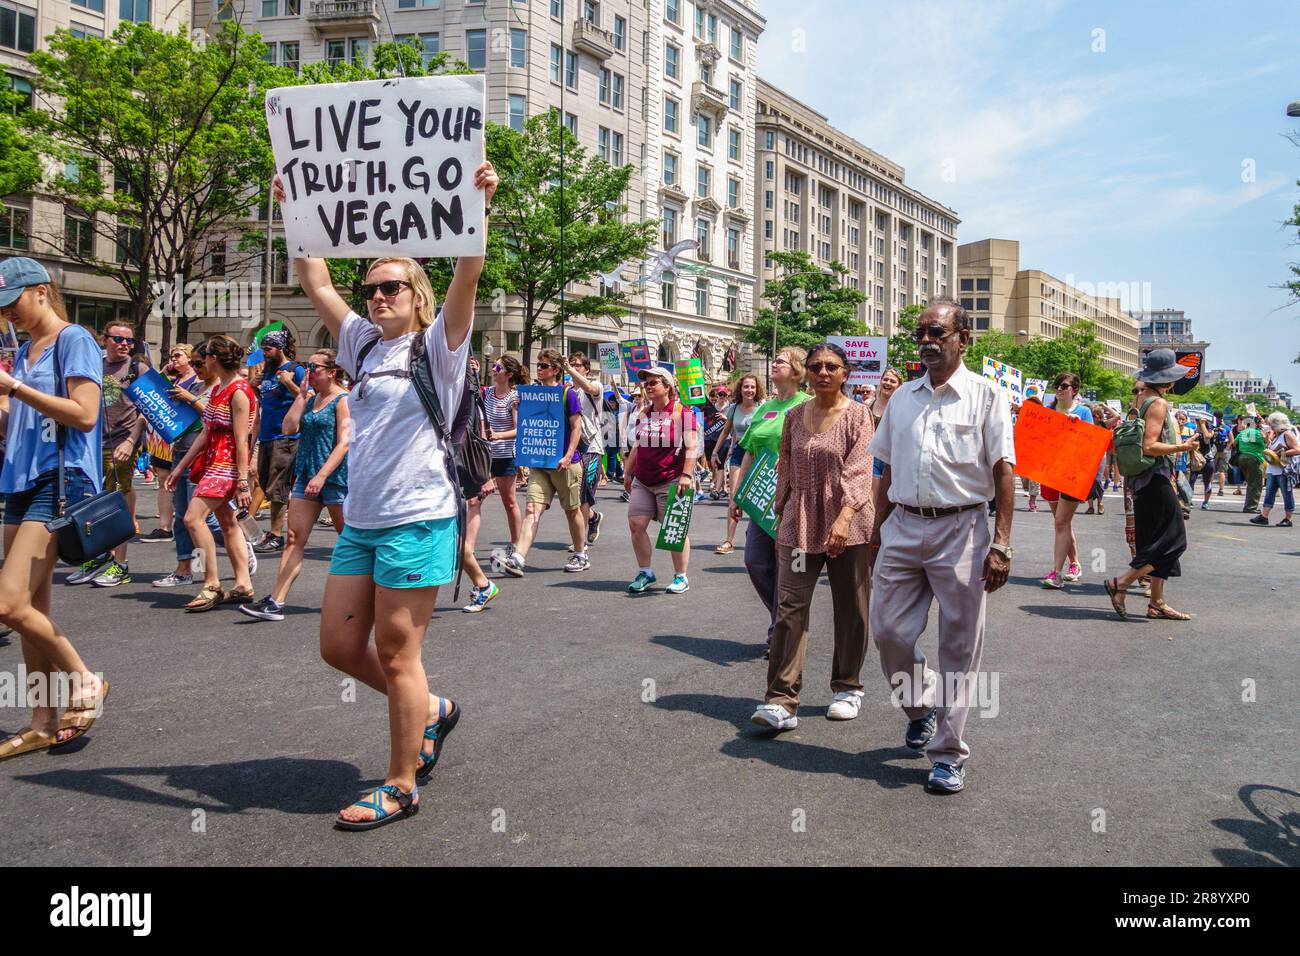 WASHINGTON, DC, USA - April 29, 2017. Protester holding sign reading "Go Vegan" in crowd at the climate march in Washington DC. Stock Photo